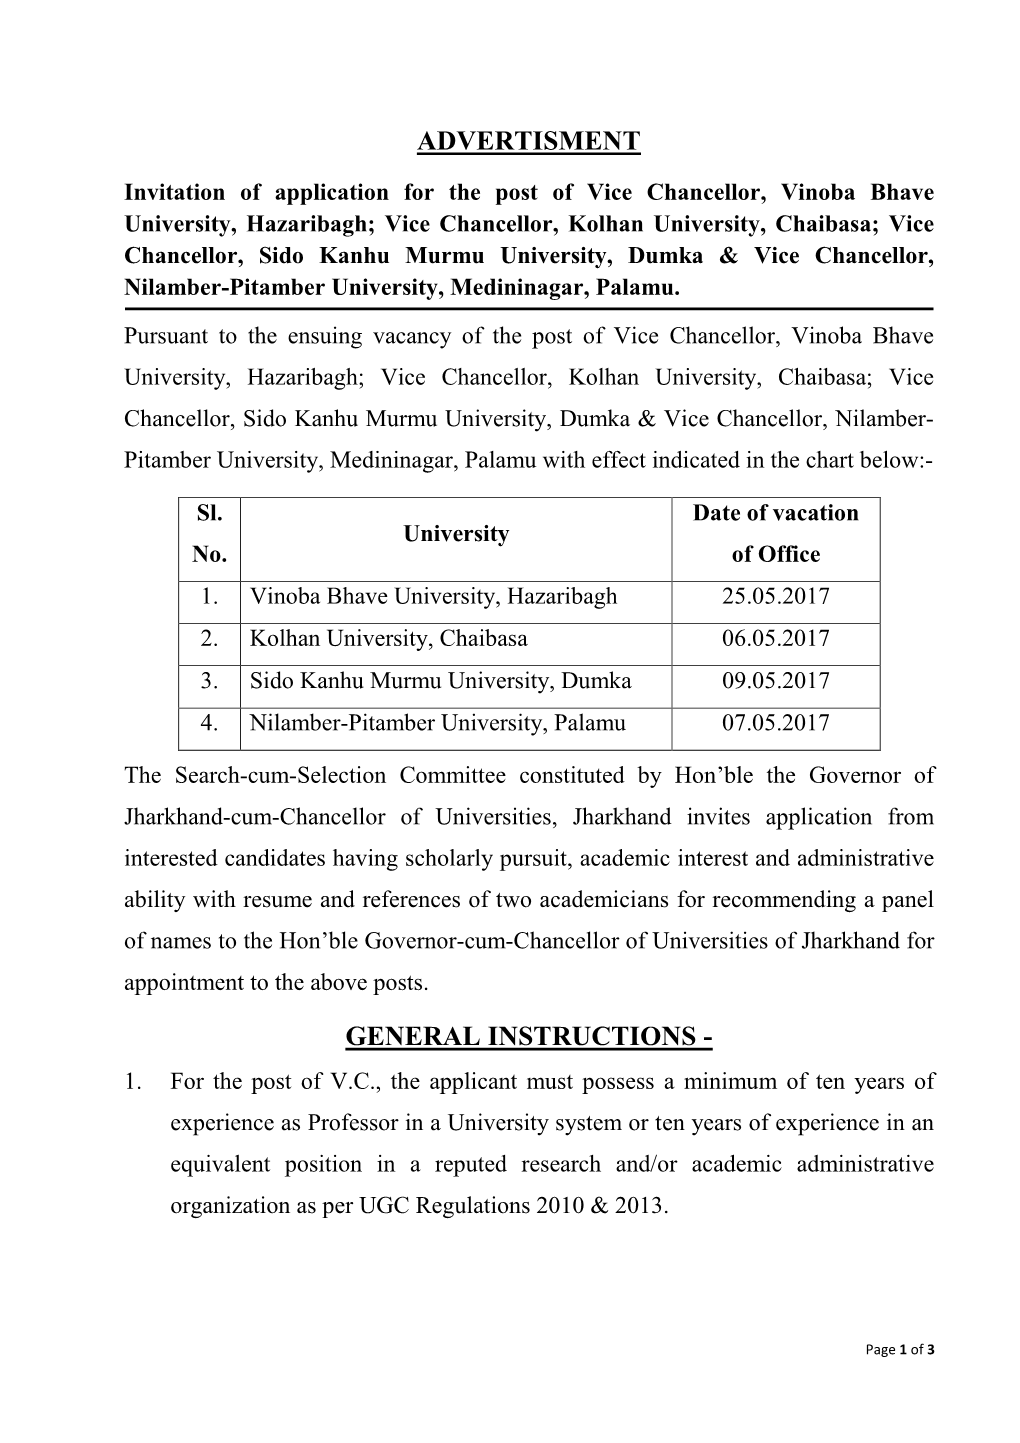 Advertisement + General Instructions for V.C of 4 Universities